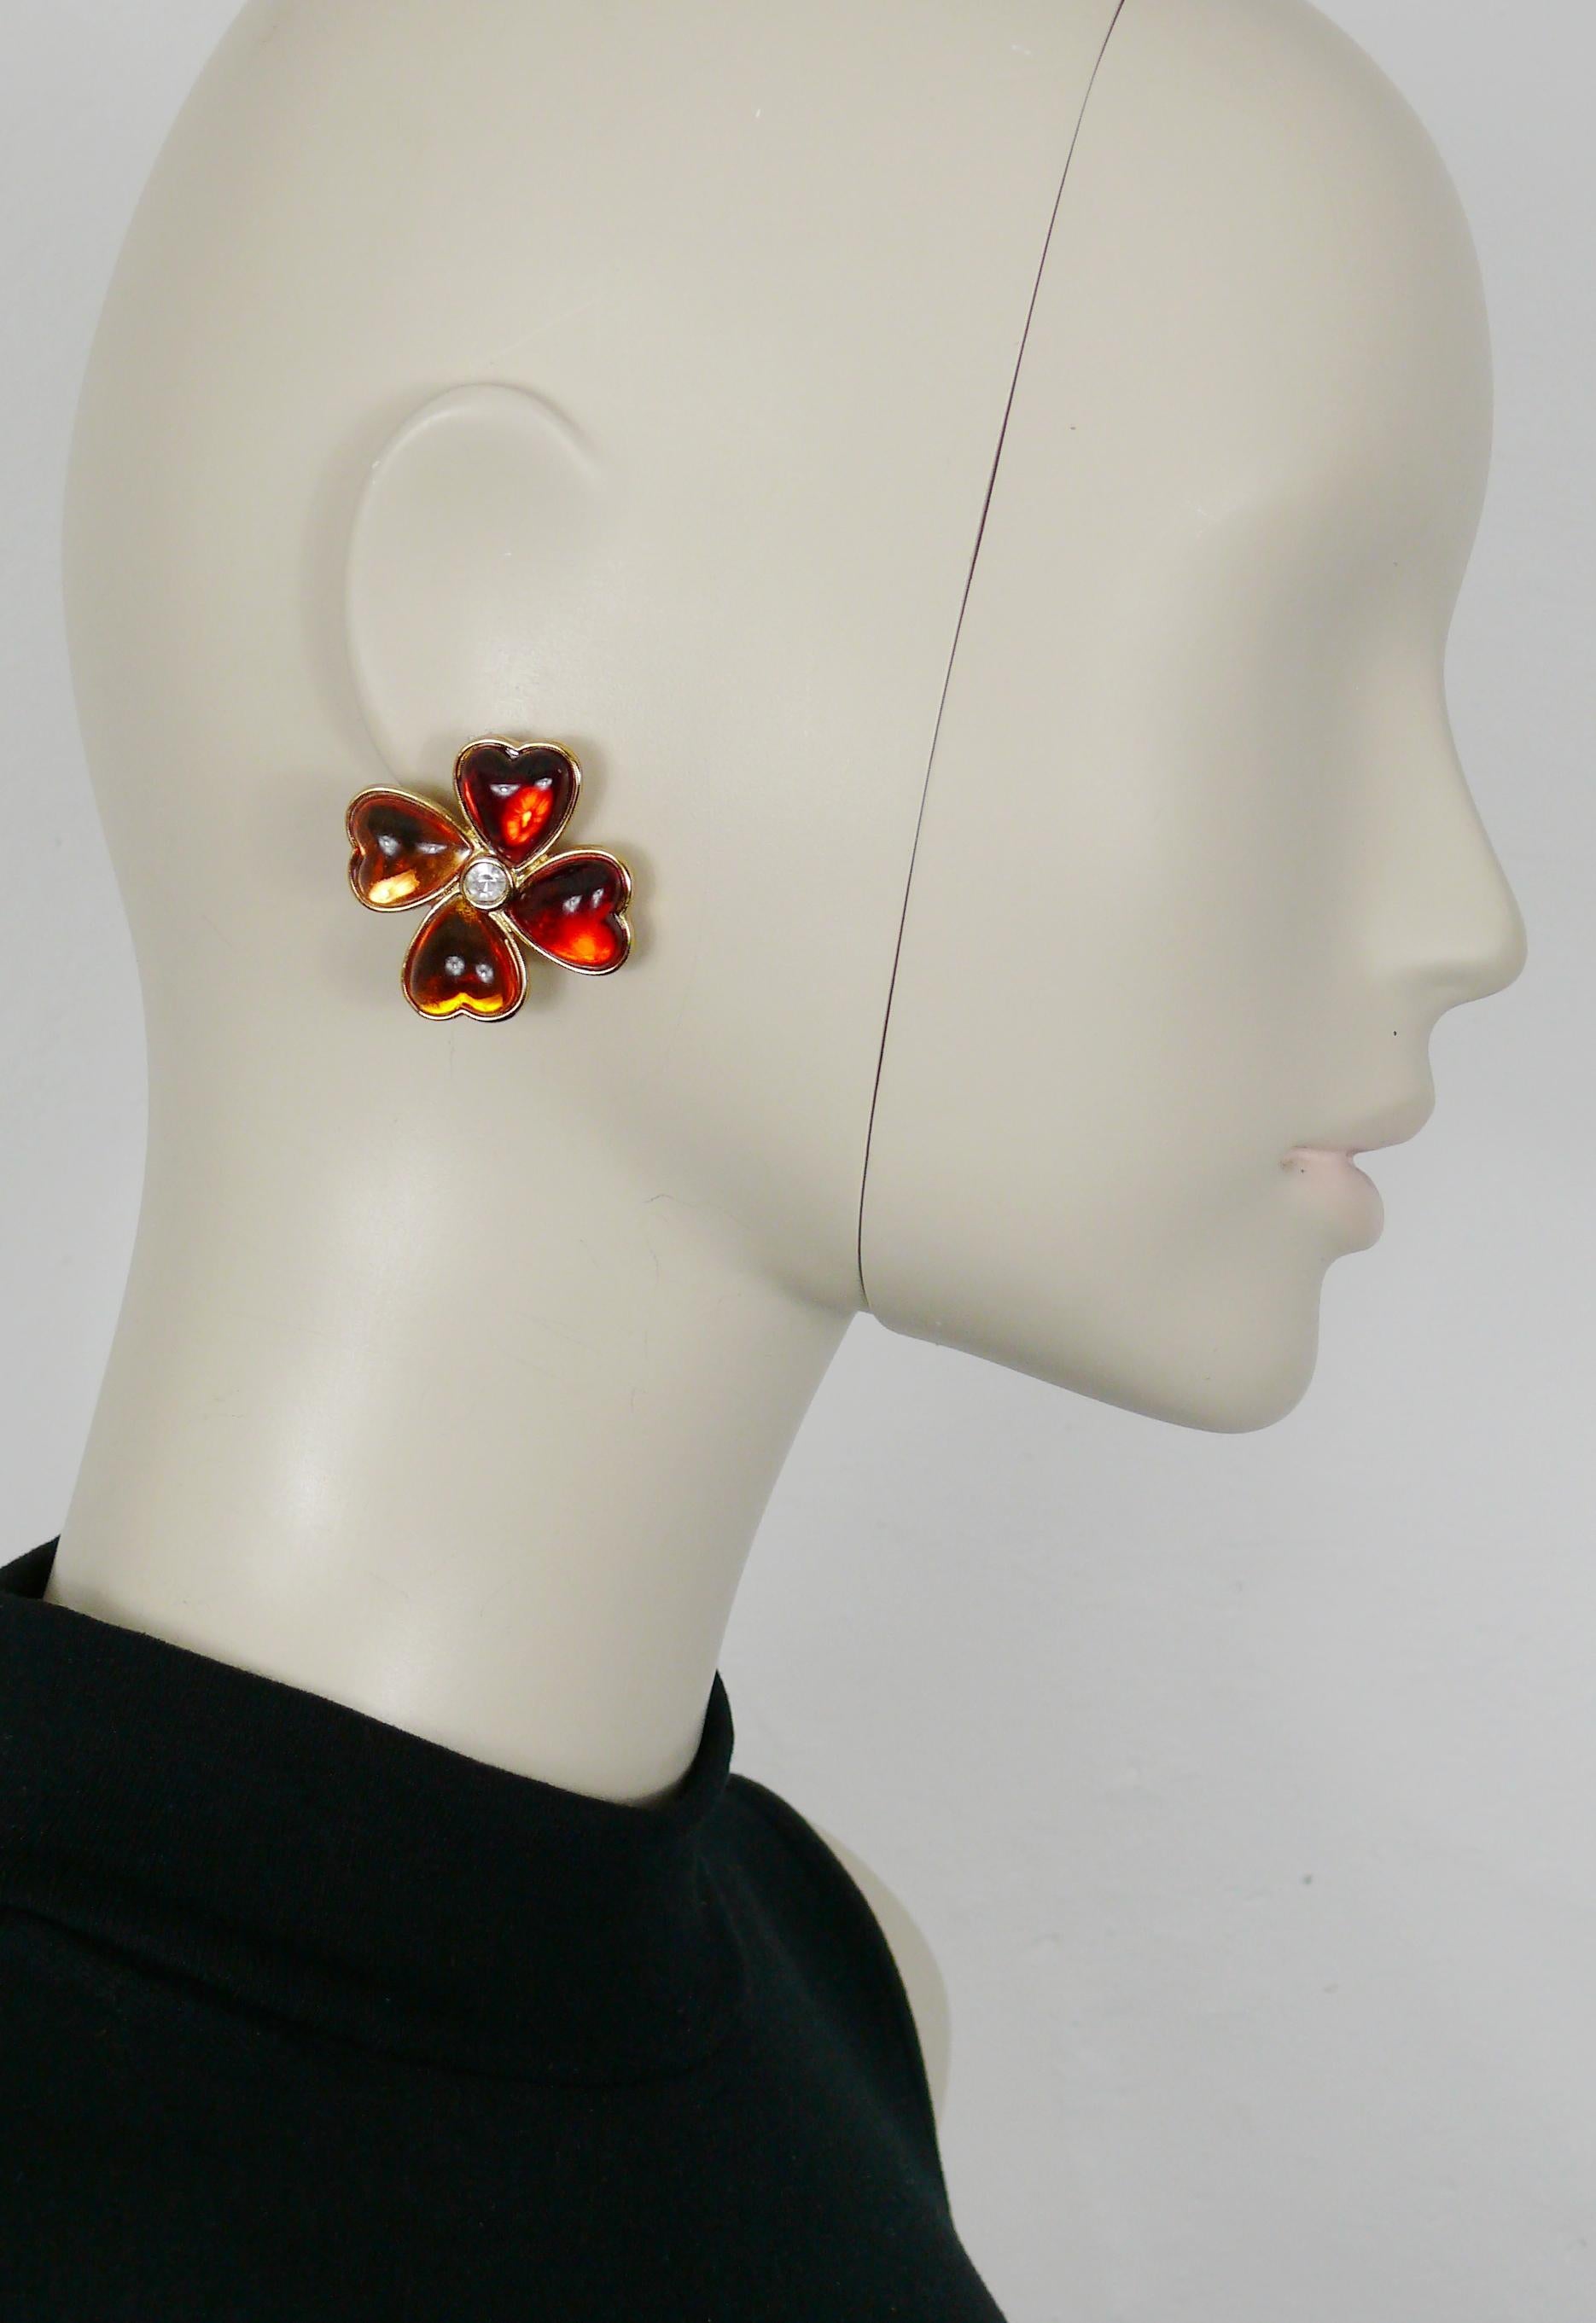 YVES SAINT LAURENT vintage clover clip-on earrings featuring orange and red resin heart petals in a gold toned setting.

Embossed YSL Made in France.

Indicative measurements : width approx. 3.5 cm (1.38 inches) / height approx. 3.5 cm (1.38